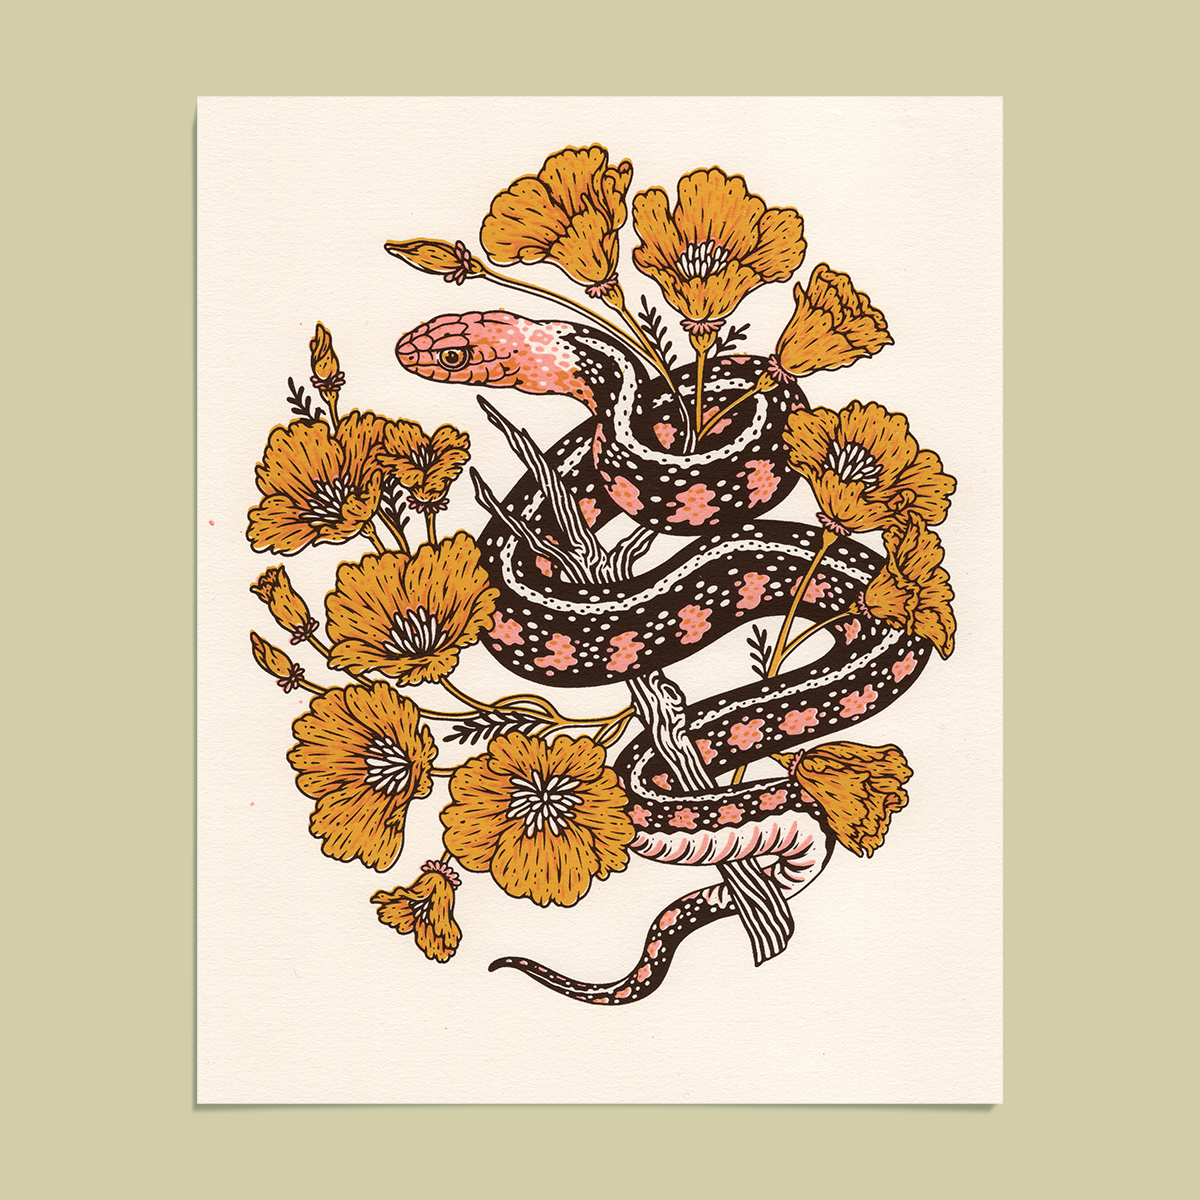 Screenprint: Snake and Poppies